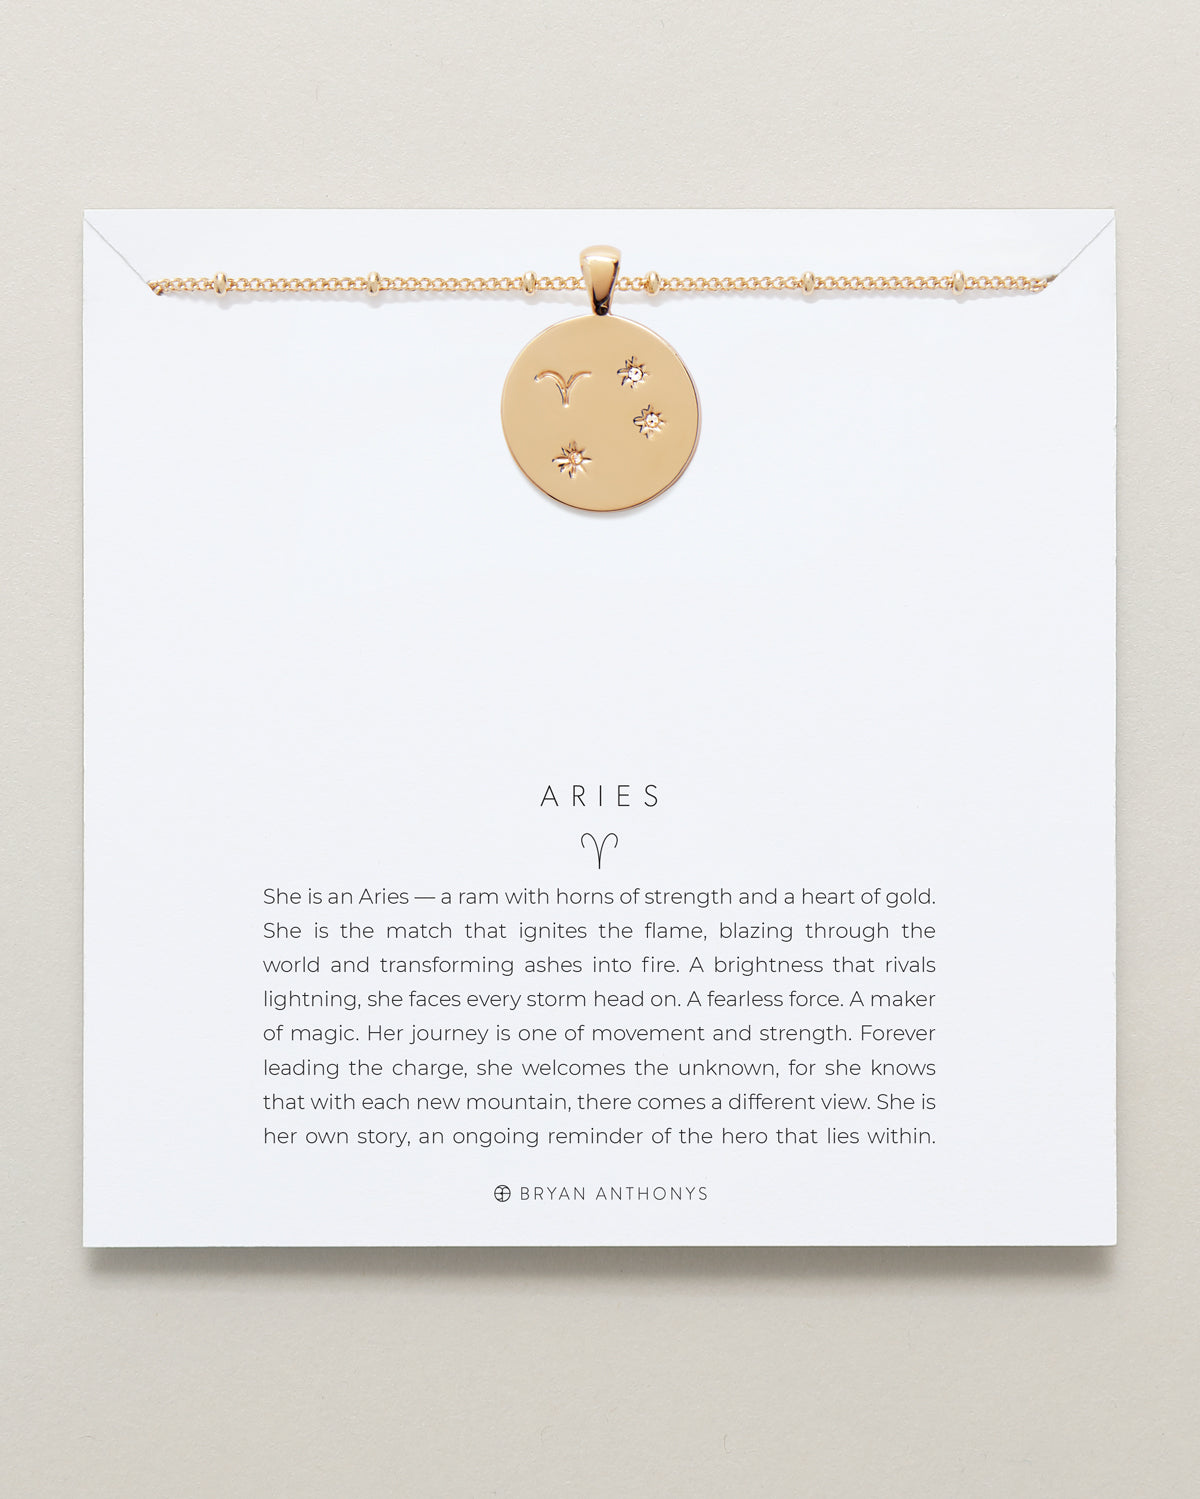 Bryan Anthonys Gold Aries Zodiac Necklace On Card